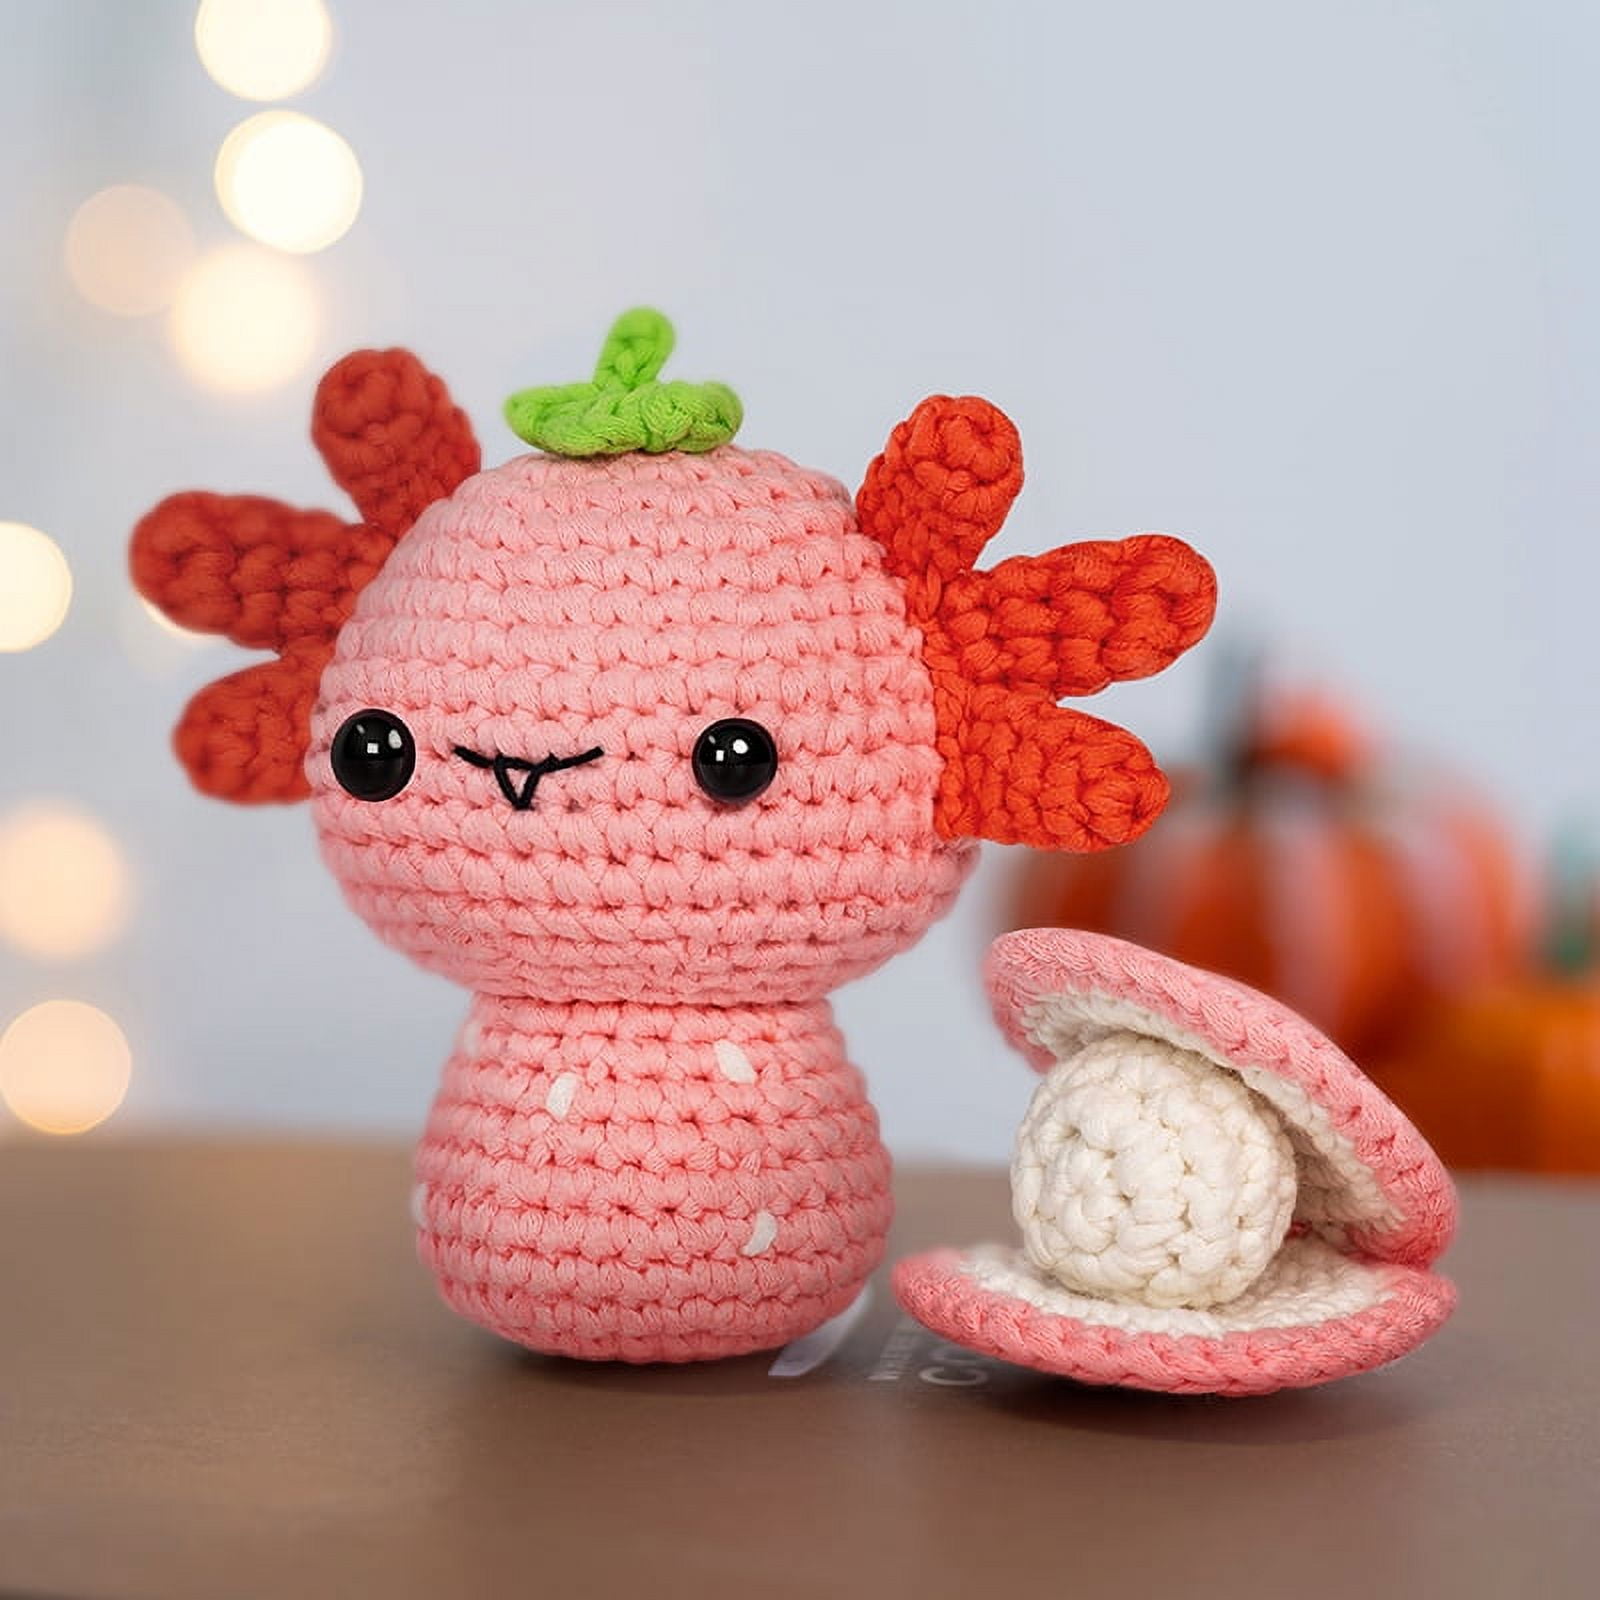 Mewaii® Crochet Blueberry Cow Crochet Kit for Beginners with Easy